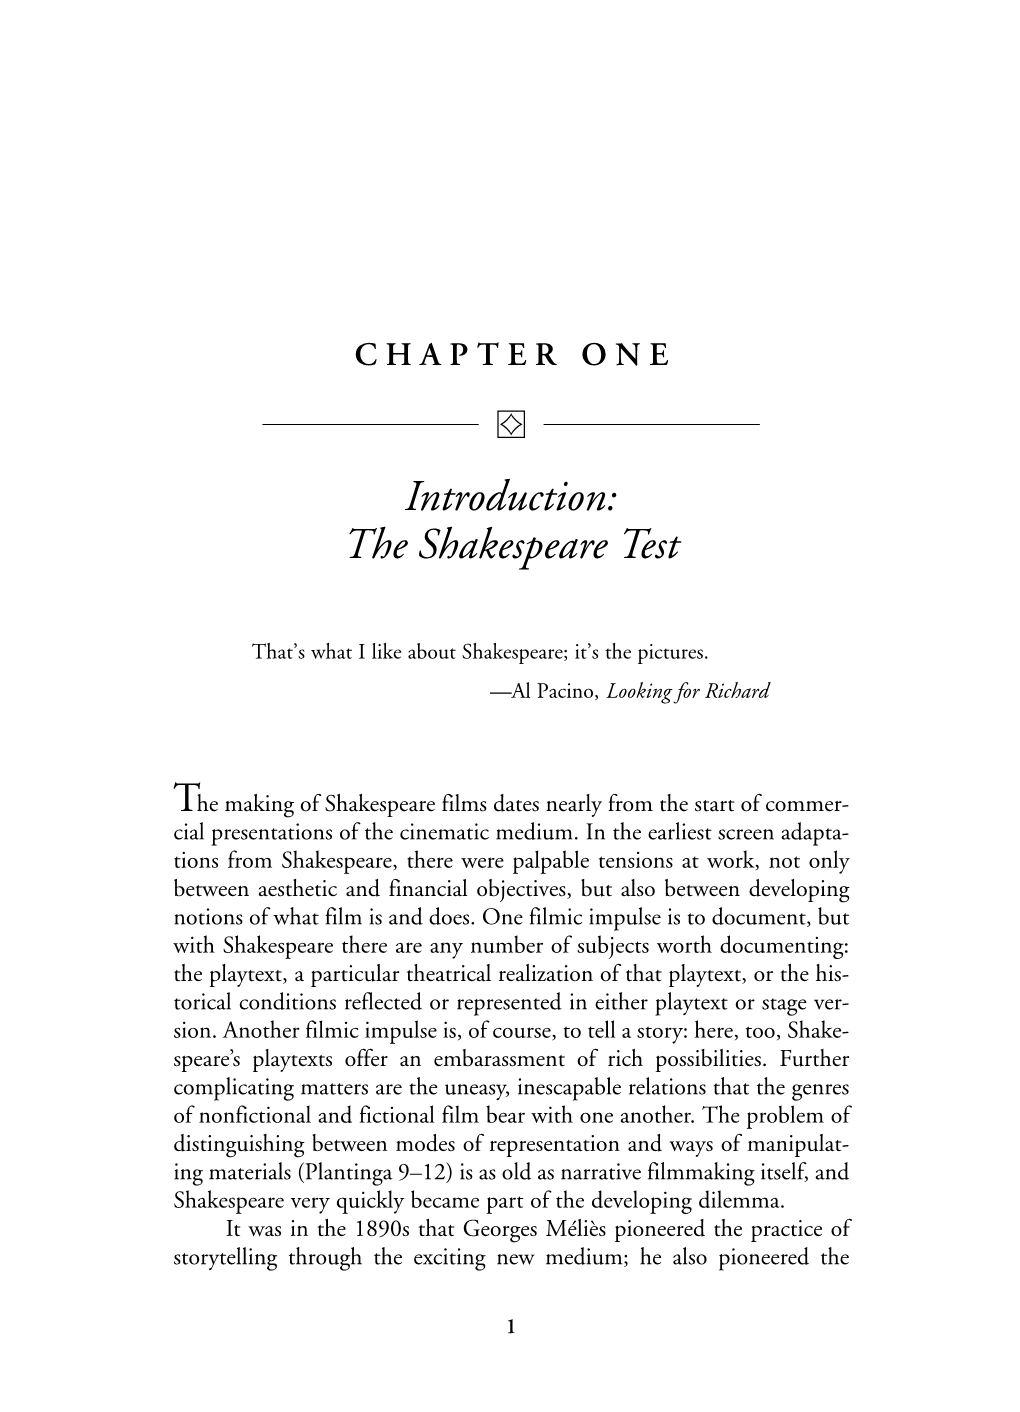 Introduction: the Shakespeare Test